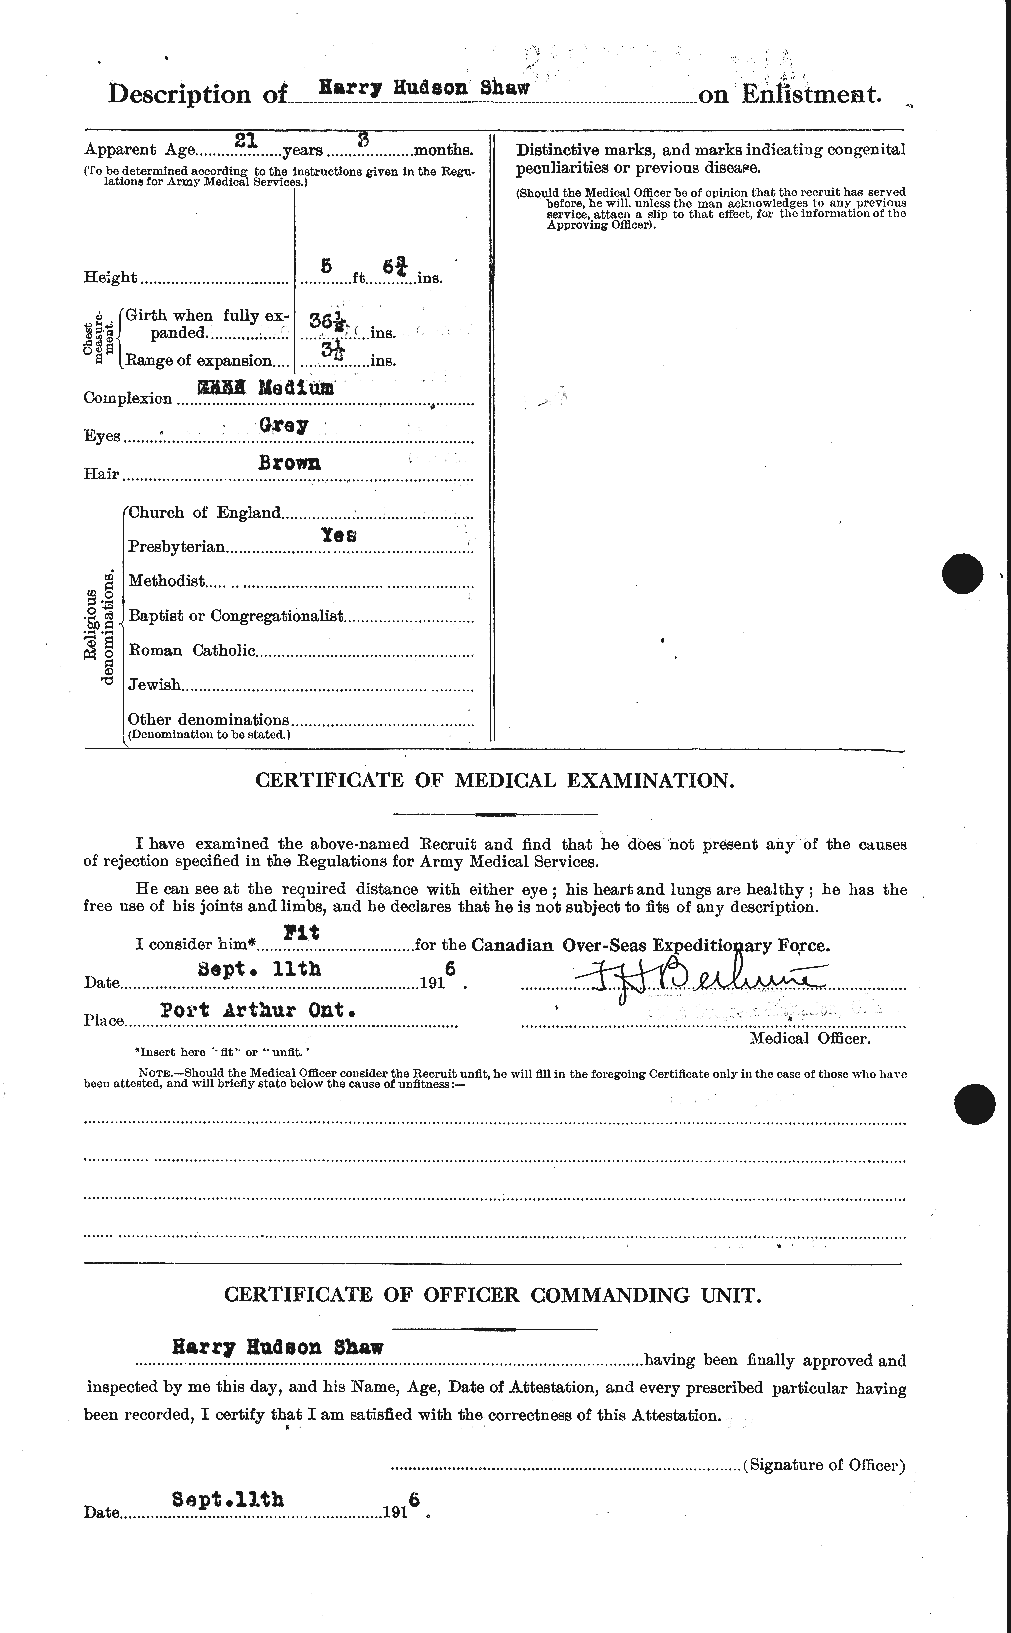 Personnel Records of the First World War - CEF 091358b